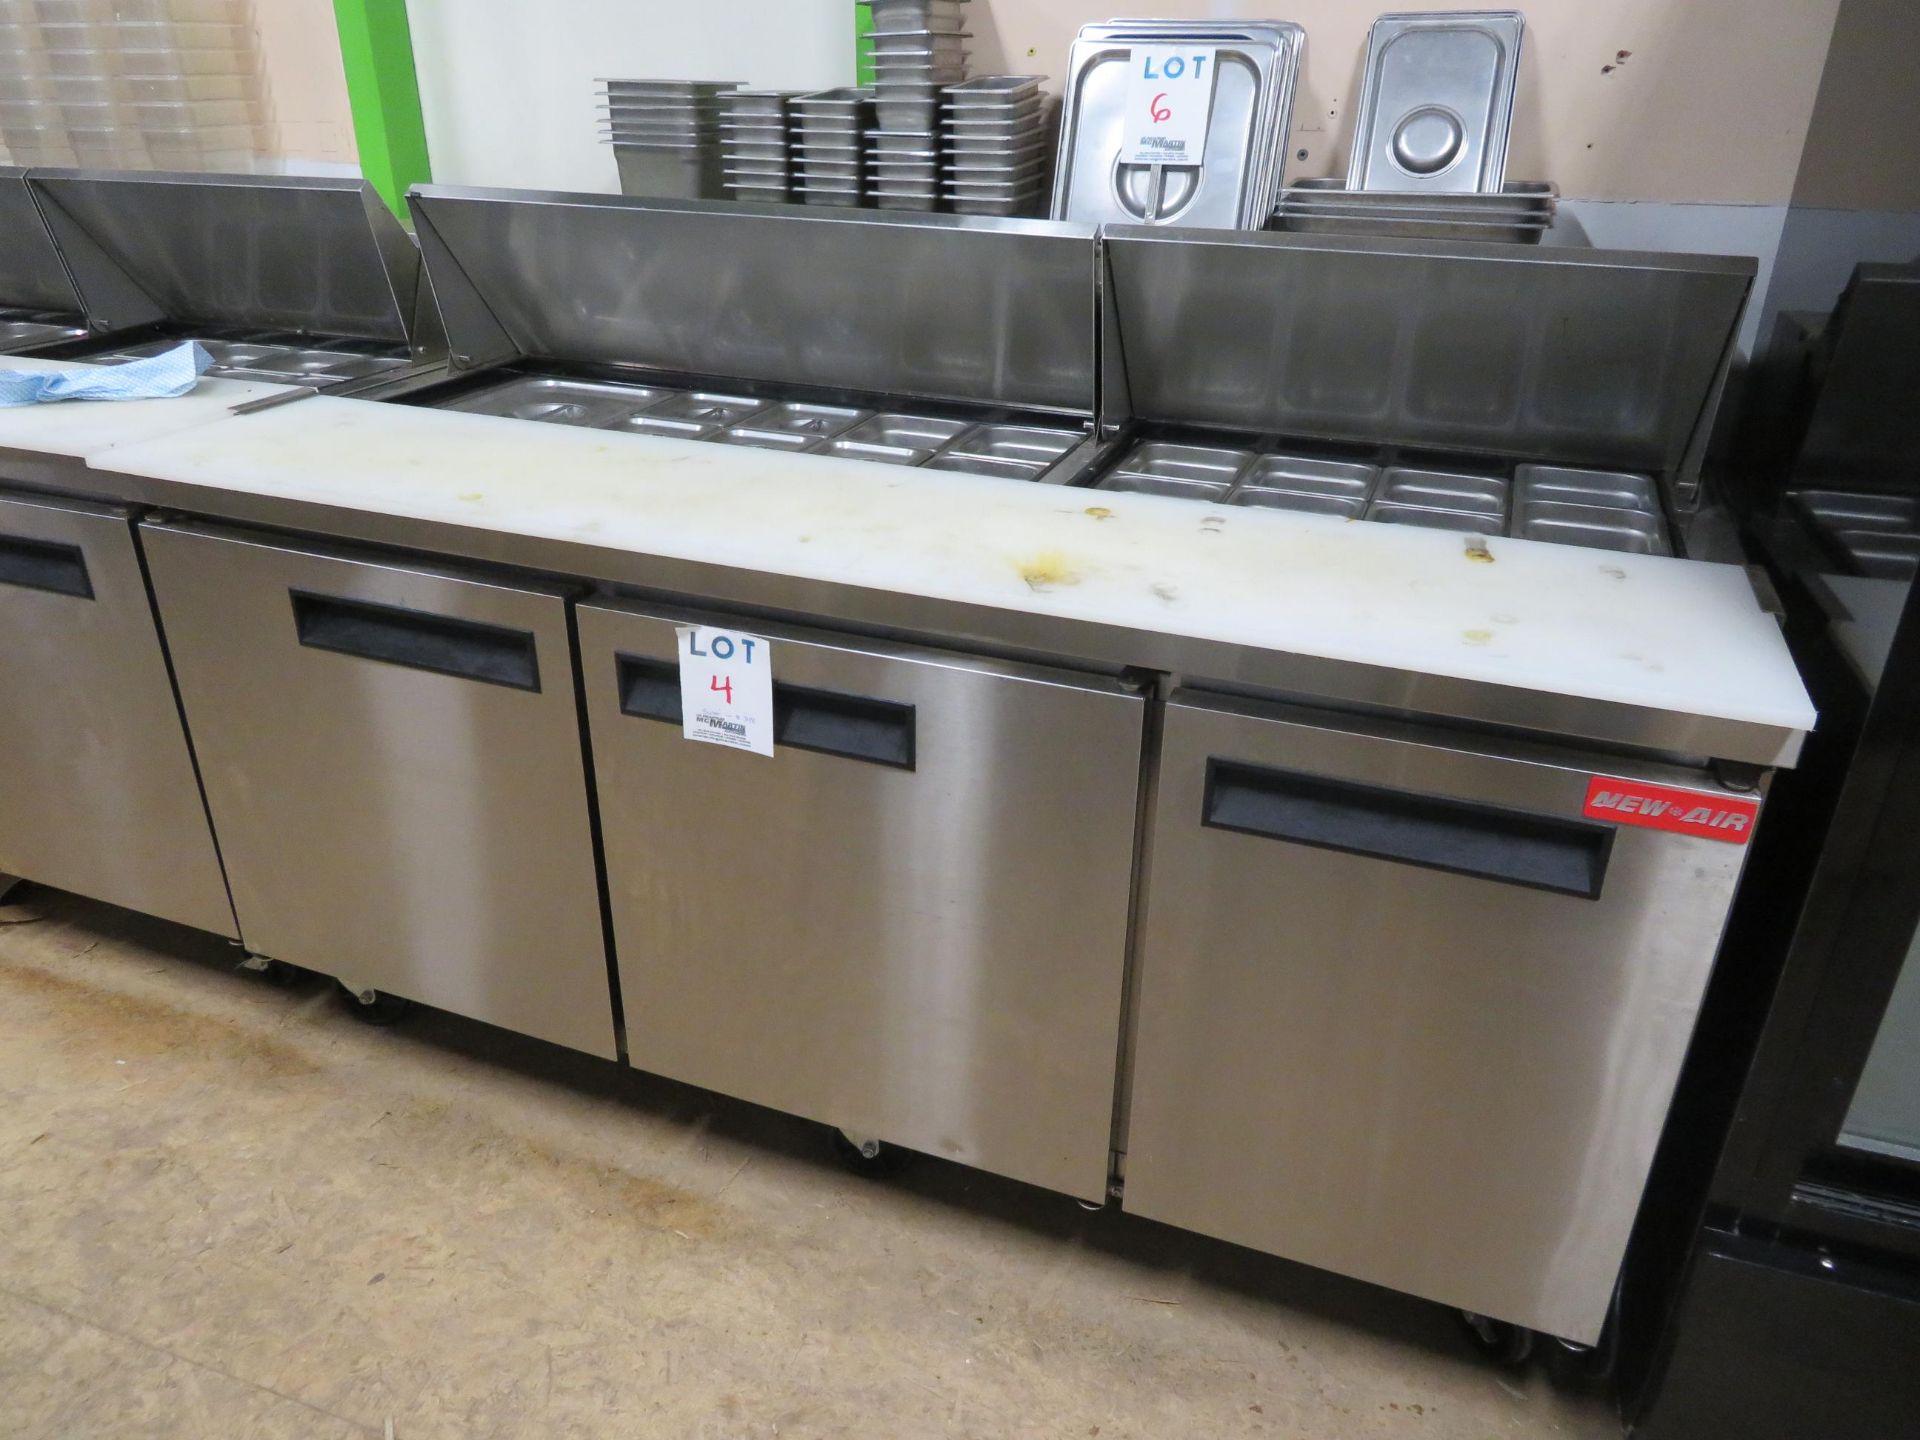 NEW AIR 3 door refrigerated preparation table, Mod # MPT-072-SA, approx. 72"w x 32"d x 36"h